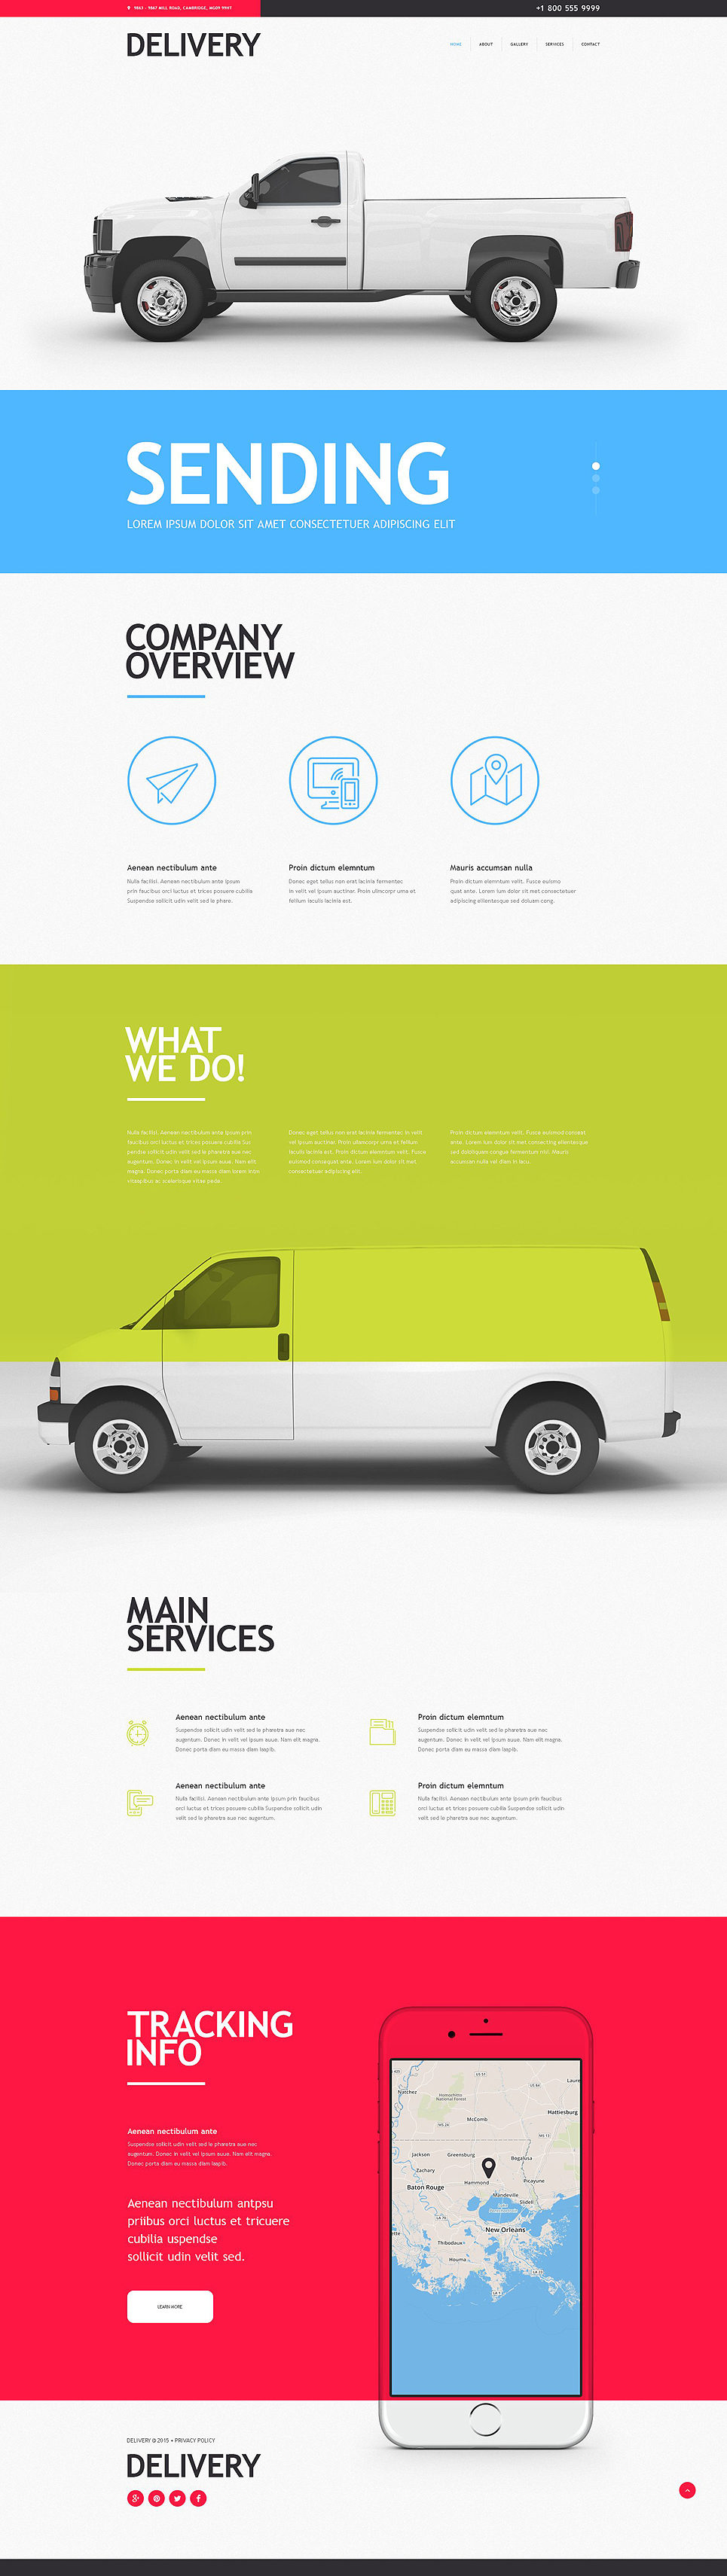 Delivery Services Muse Template New Screenshots BIG